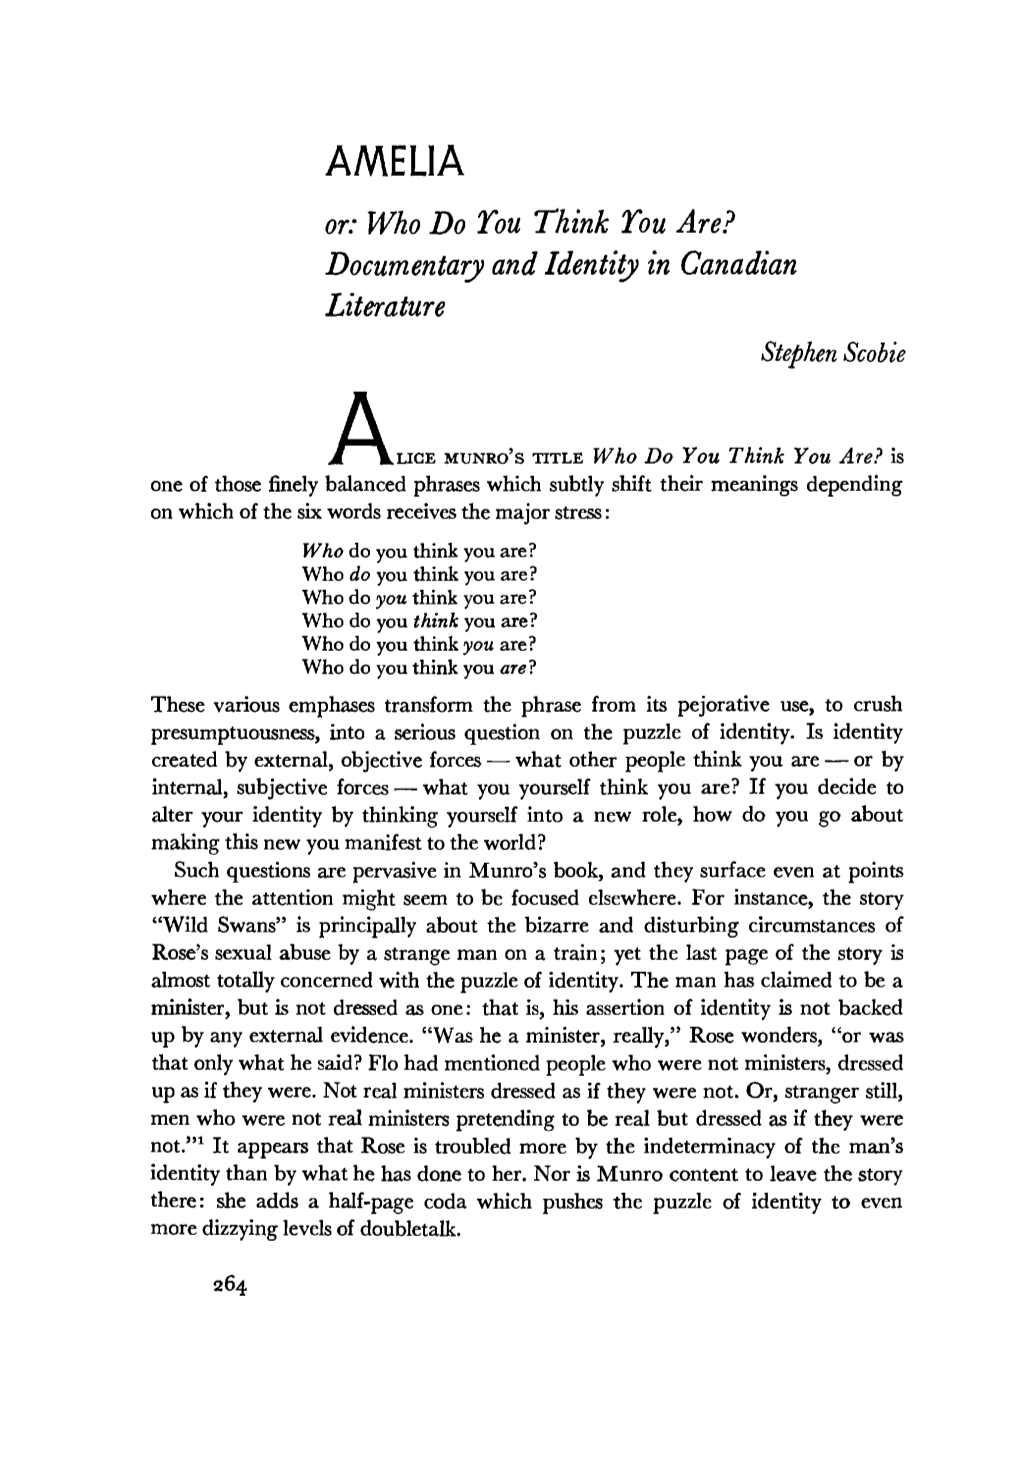 AMELIA Or: Who Do Той Think Той Are? Documentary and Identity in Canadian Literature Stephen Scobie